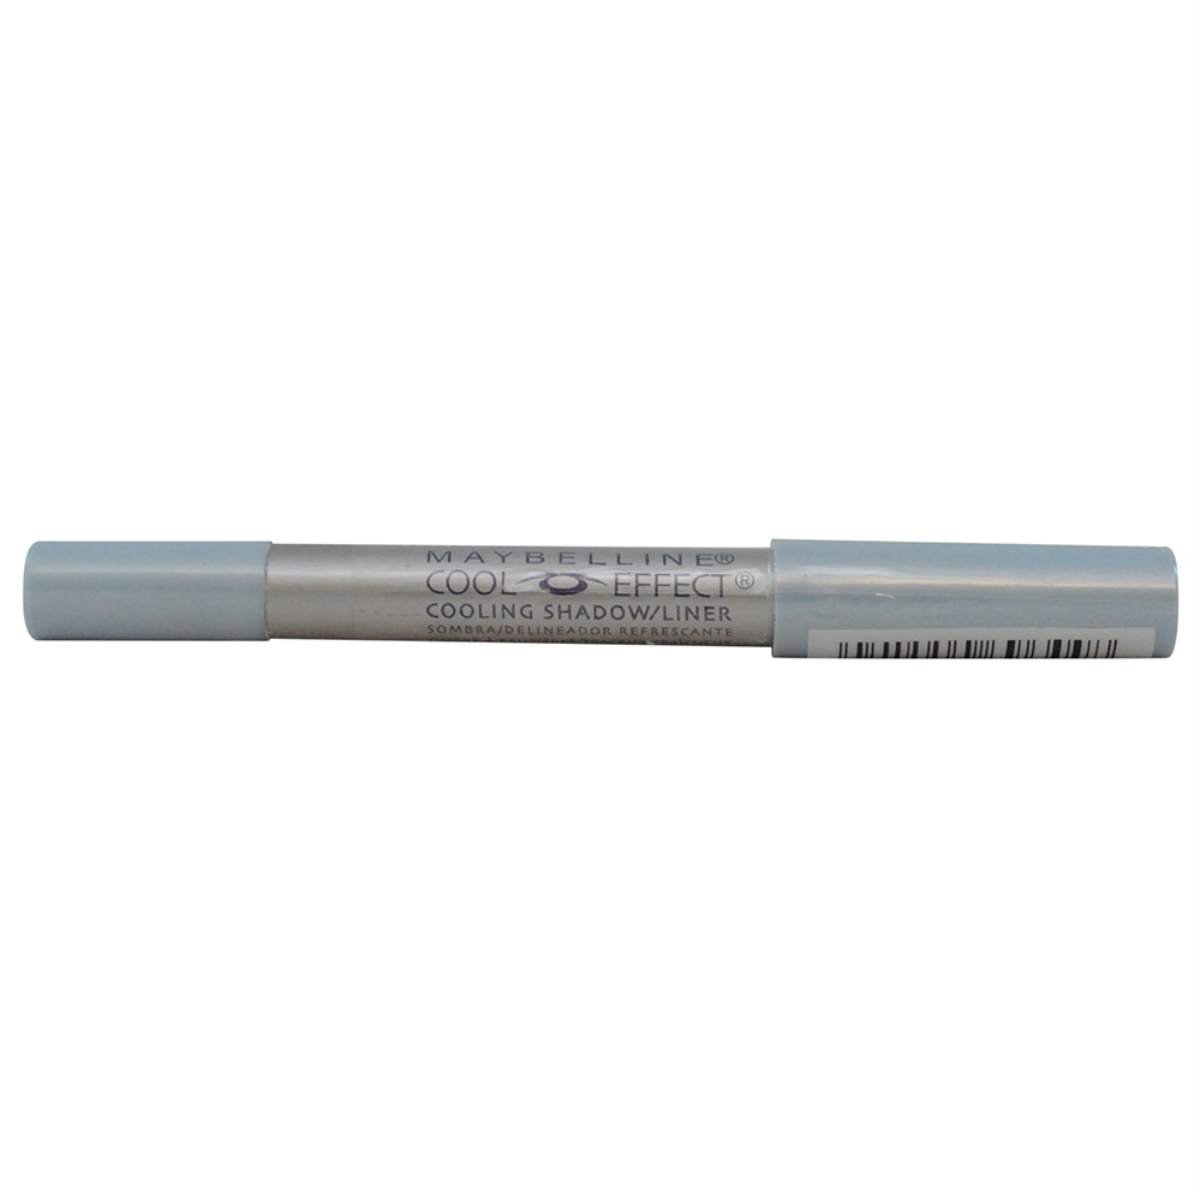 Maybelline Color Effect Cooling Shadow & Liner - Gives Me The Chills - $7.83 - $8.22